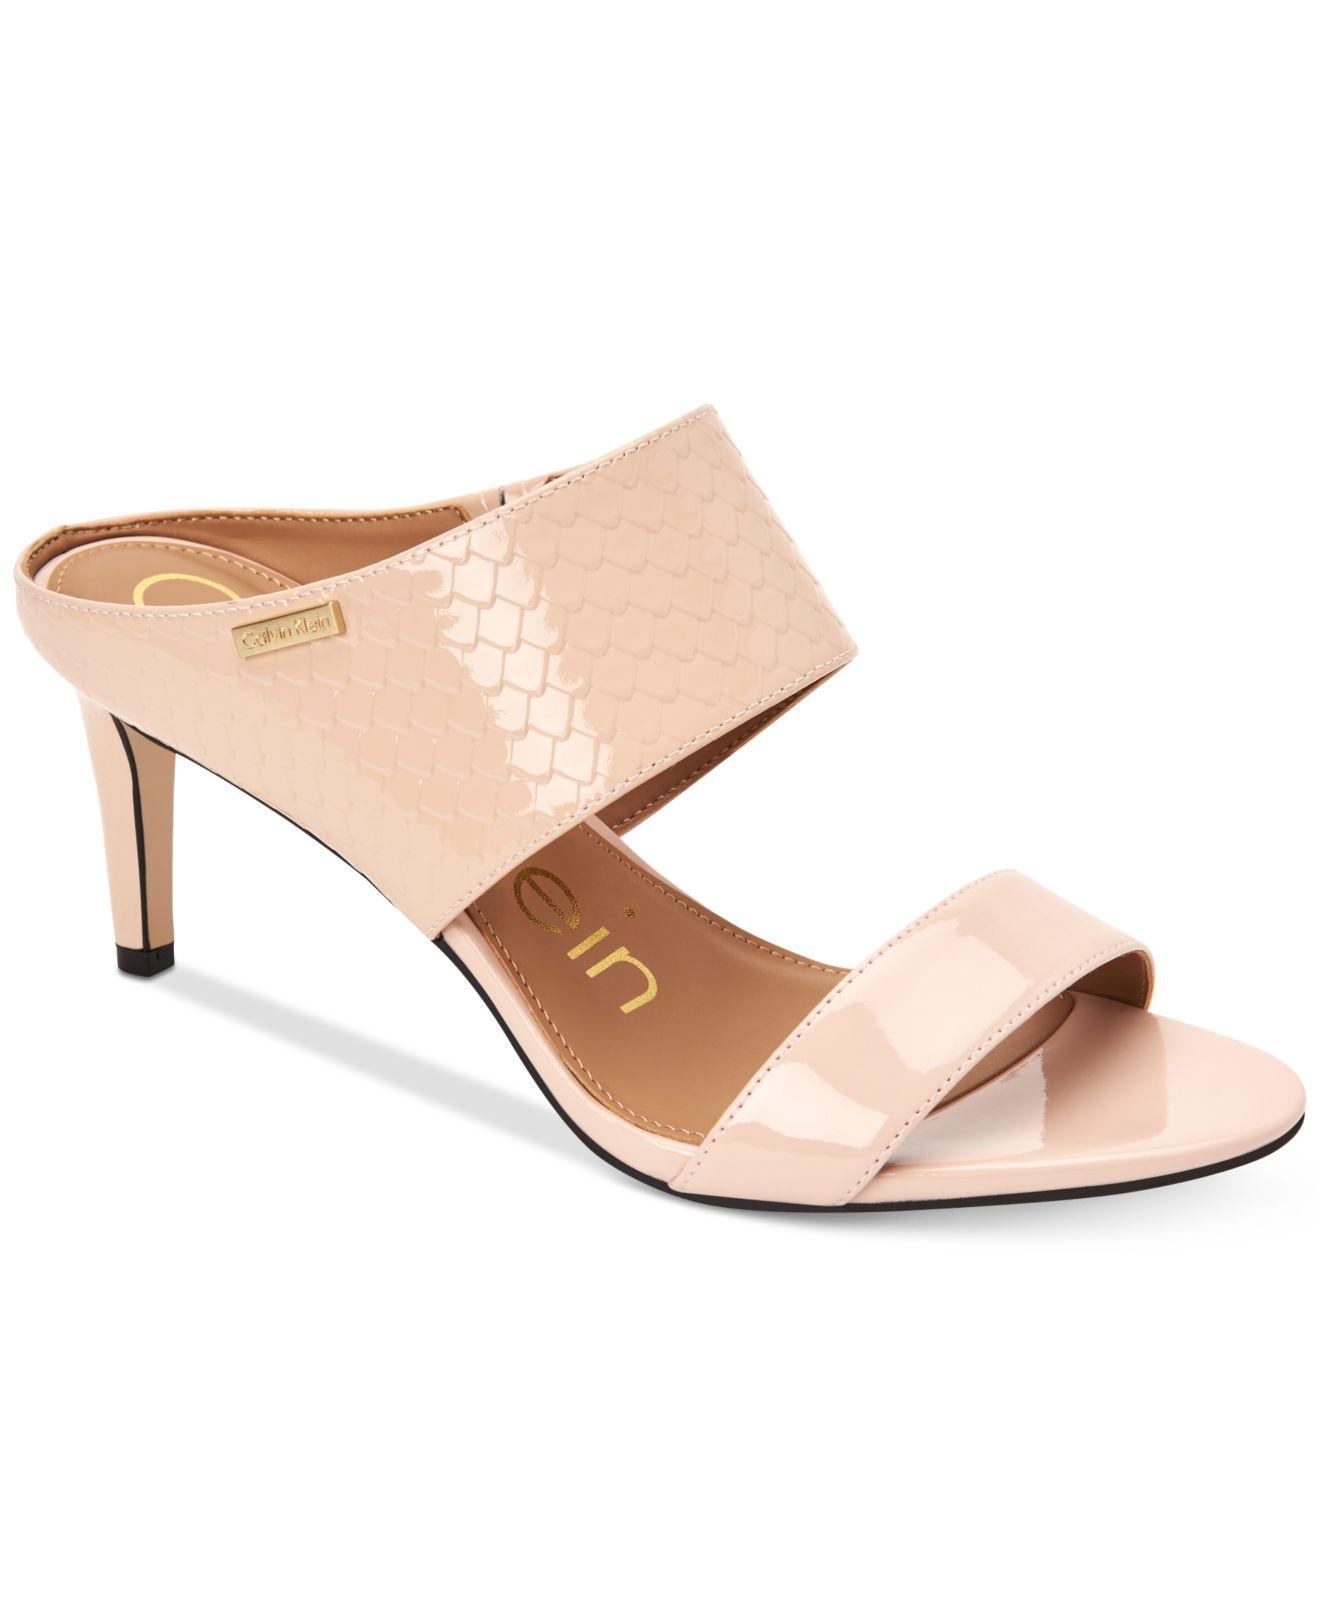 Calvin Klein Cecily Slip On Heeled Dress Sandals in Natural | Lyst Canada